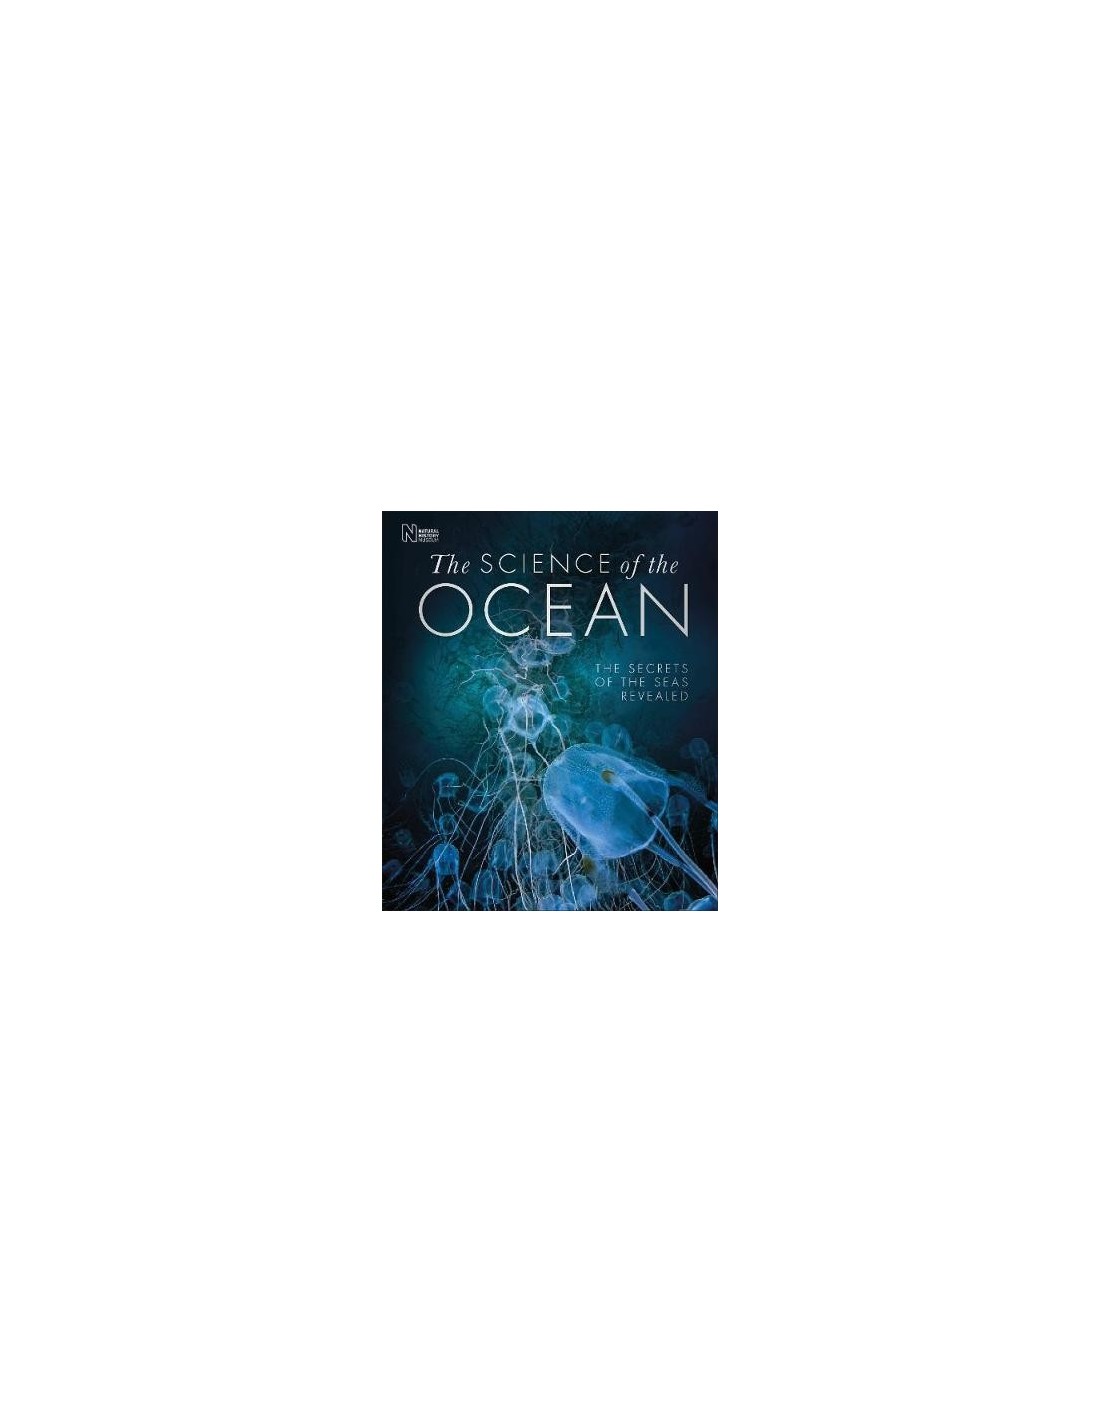 The Science of the Ocean : The Secrets of the Seas Revealed